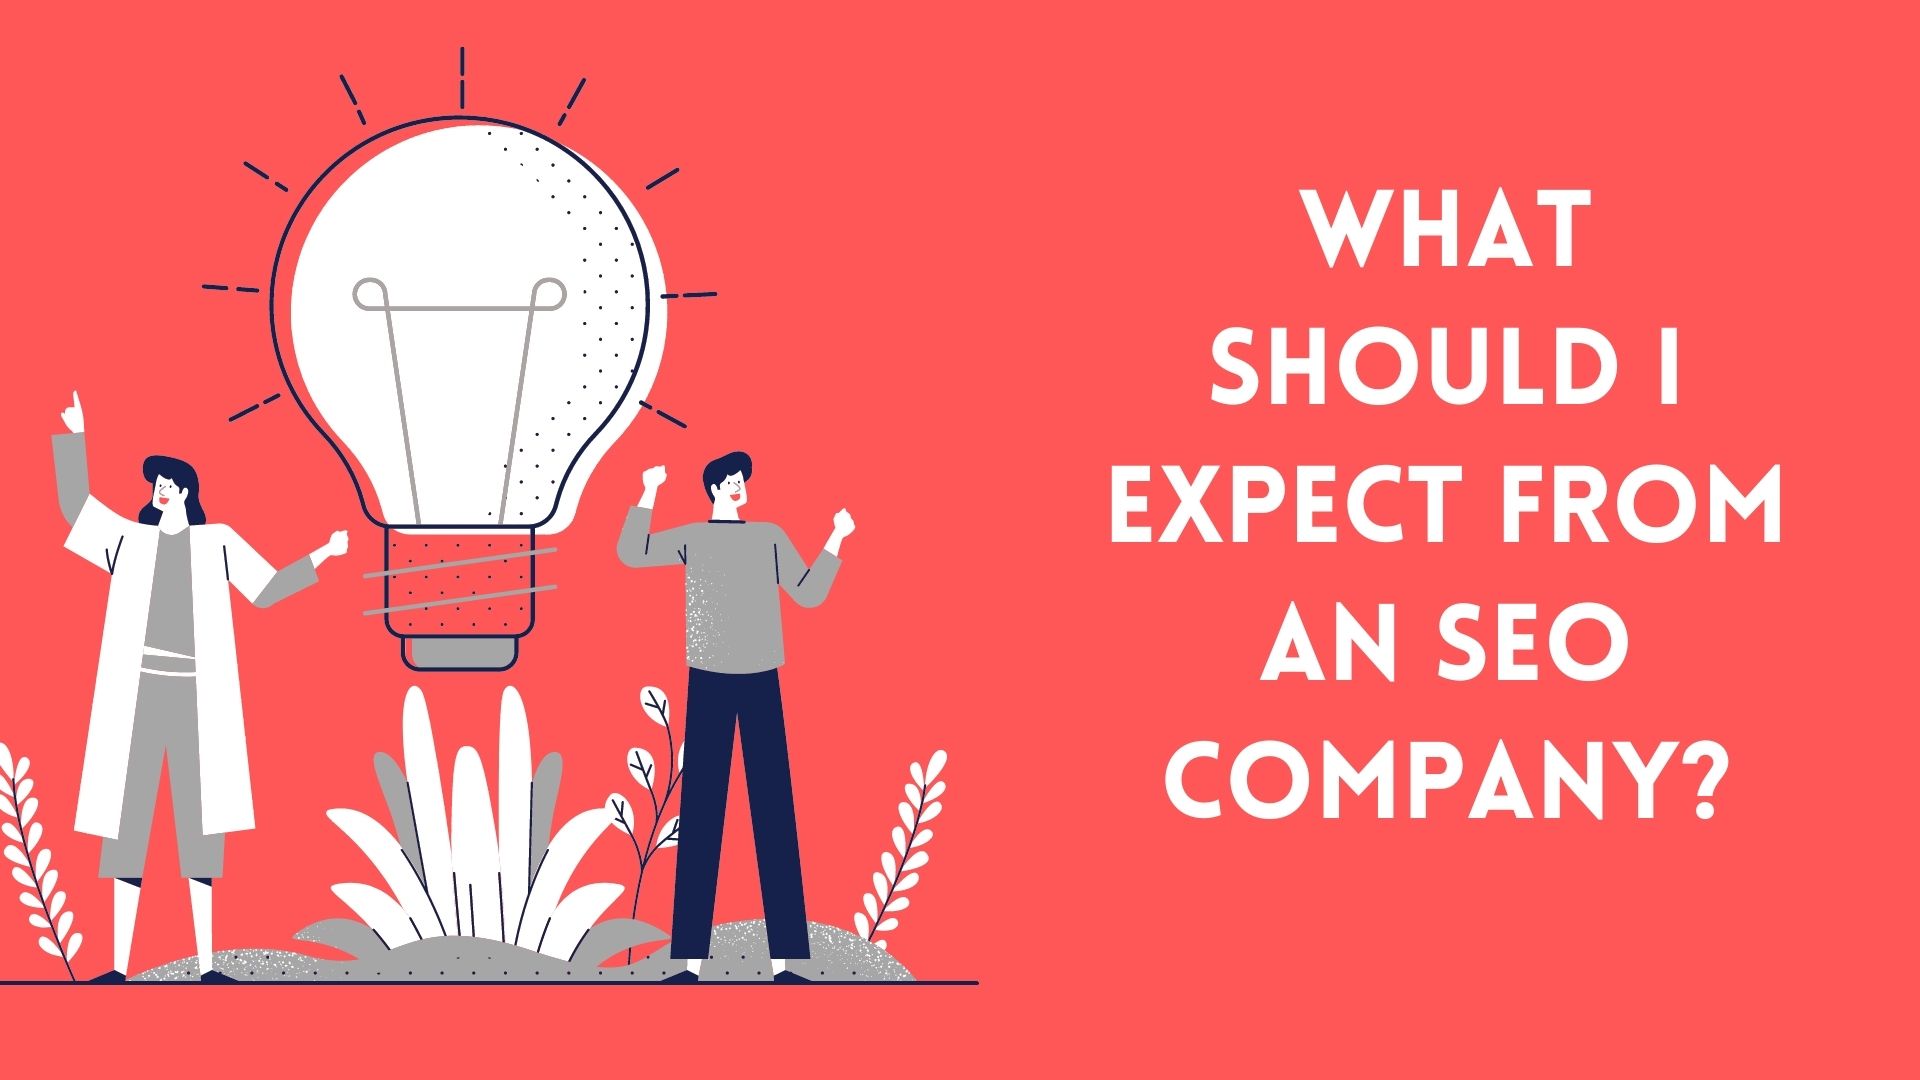 What Should I Expect From an SEO Company